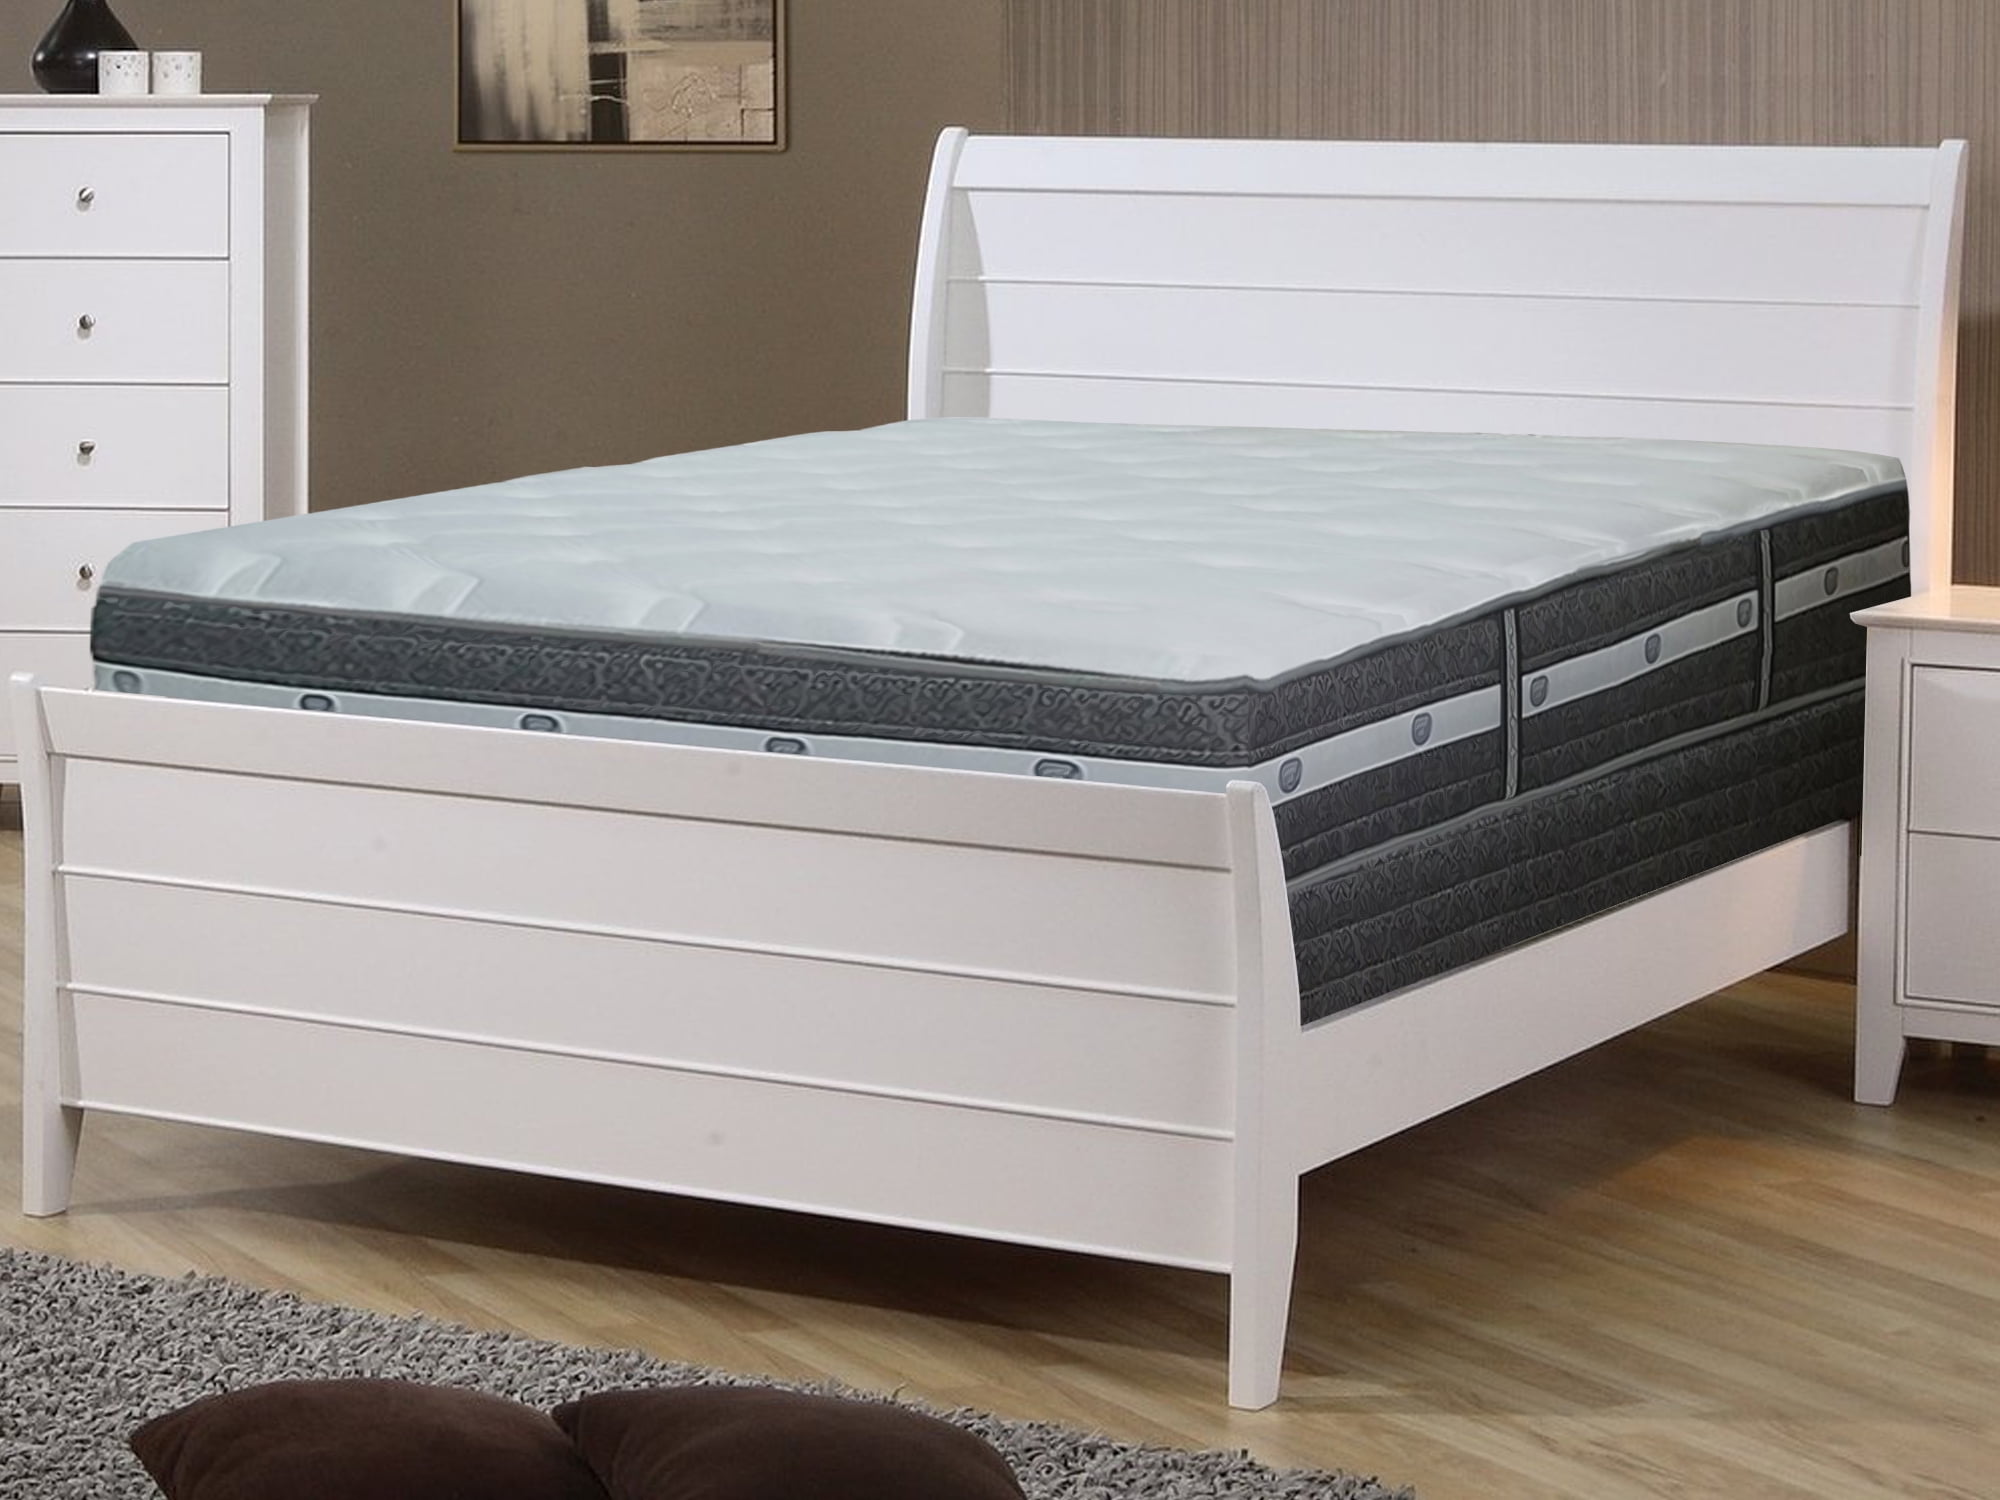 king size mattress boxspring and frame